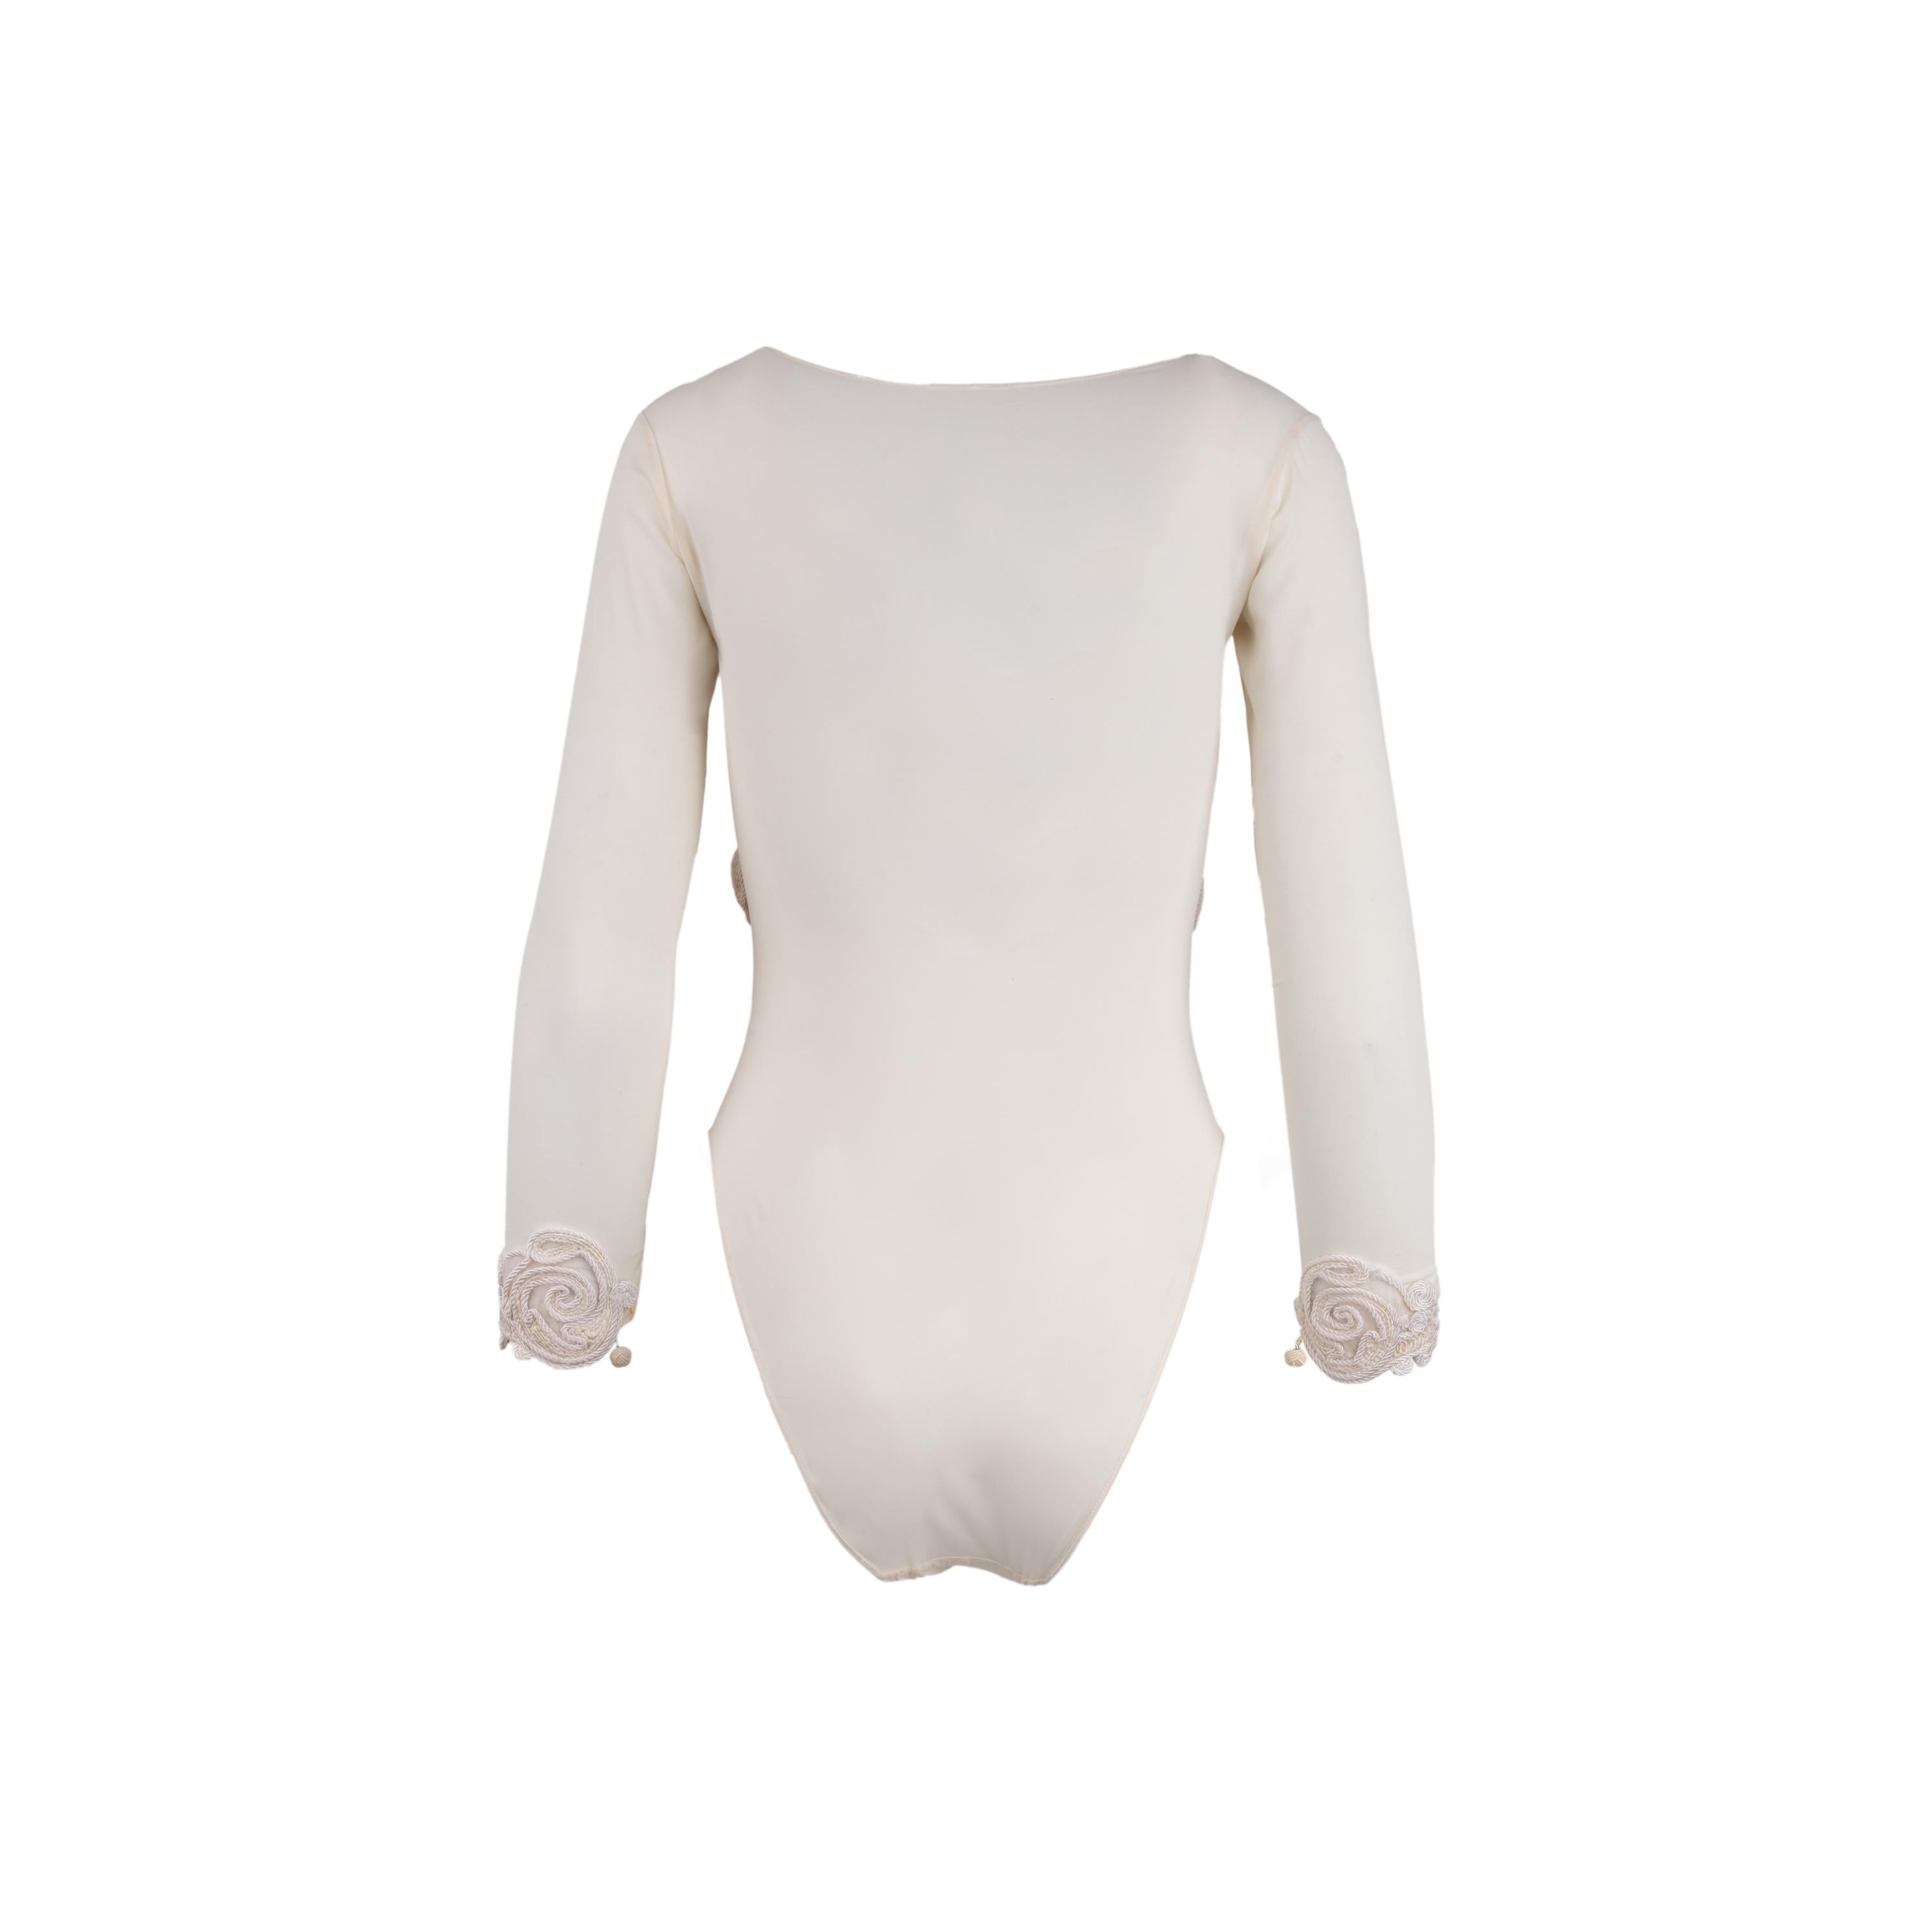 Gianfranco Ferré cream bodysuit from the 90s, embroidered with ton-sur-ton drawstring lace, long sleeves.

Remarks: No size and composition tag.